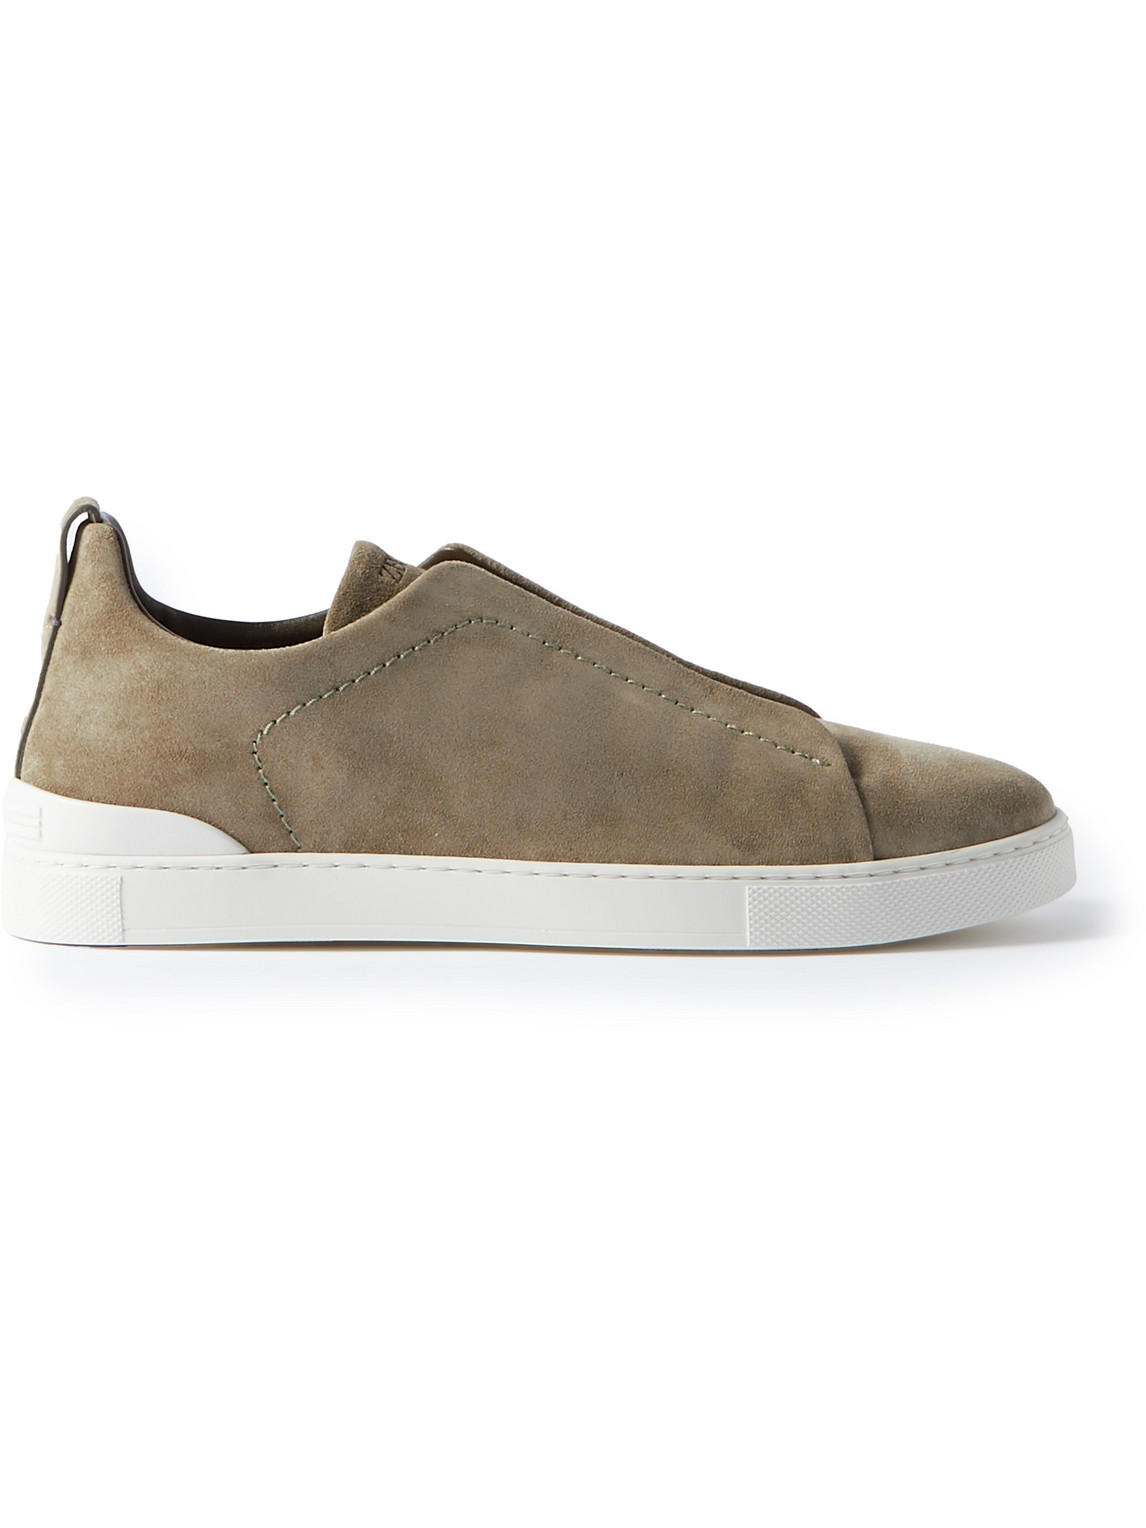 Zegna Triple Stitch Suede Slip-on Sneakers In Brown